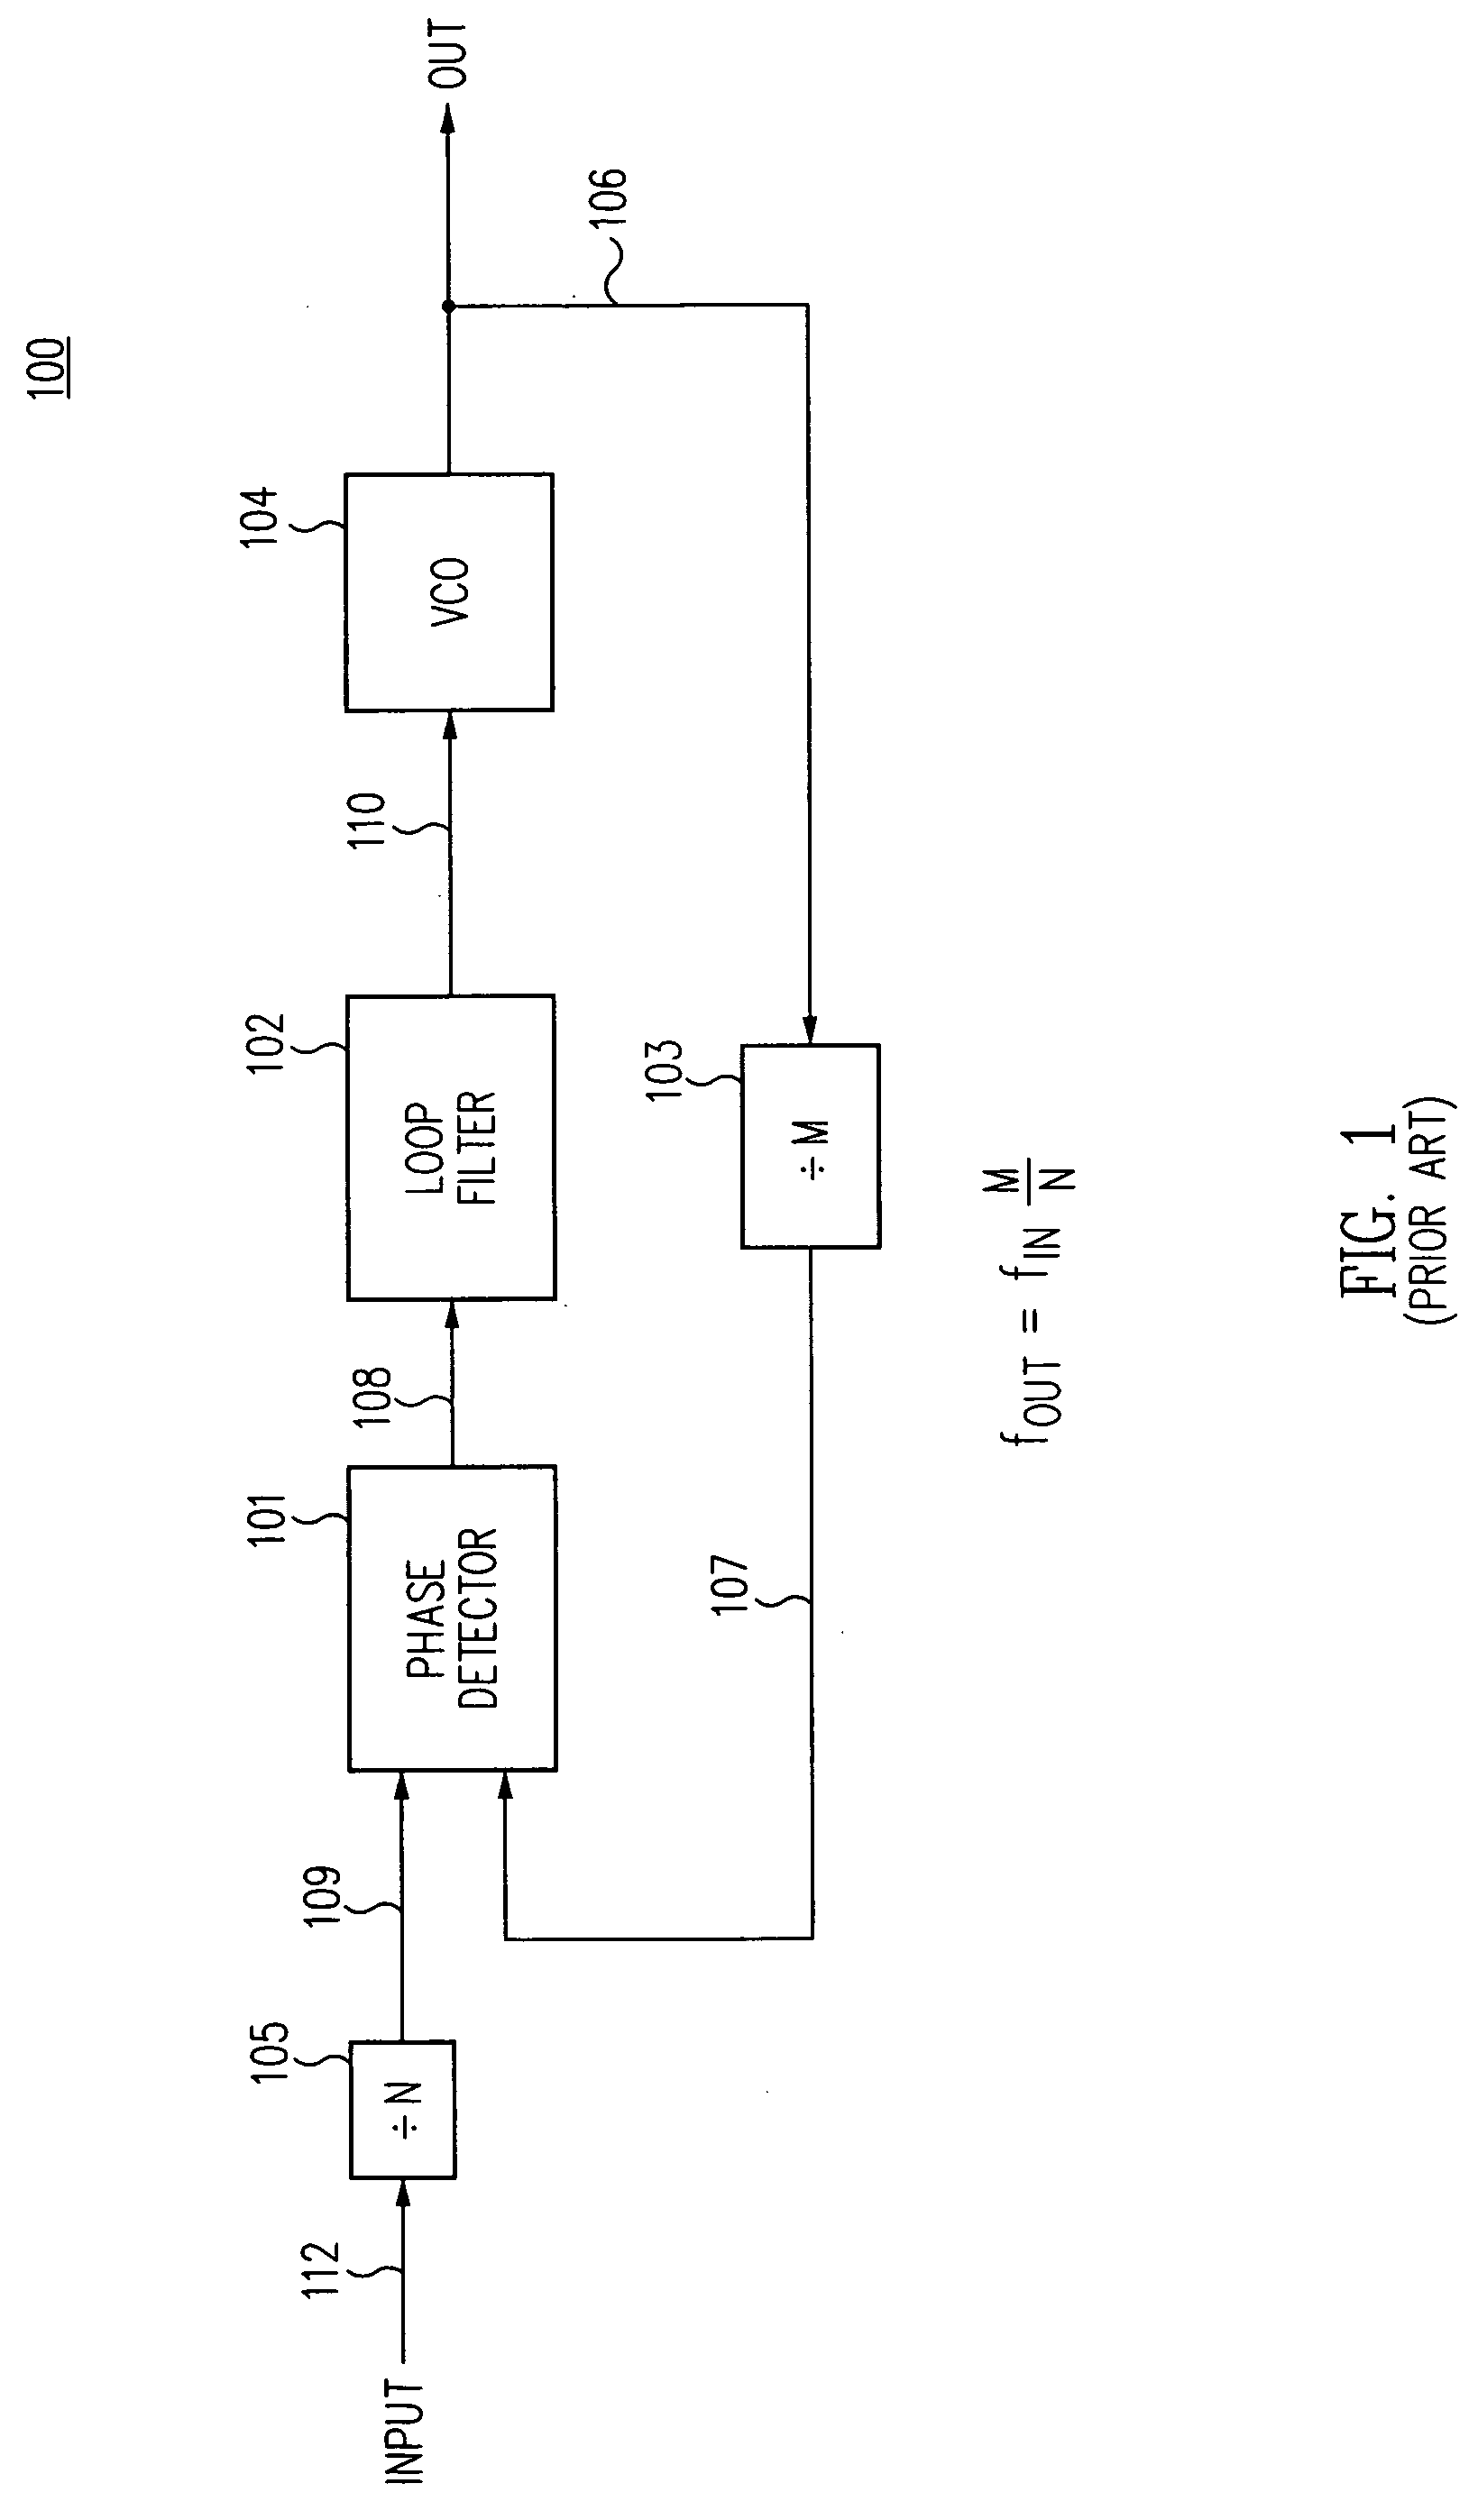 Configurable circuit structure having reduced susceptibility to interference when using at least two such circuits to perform like functions